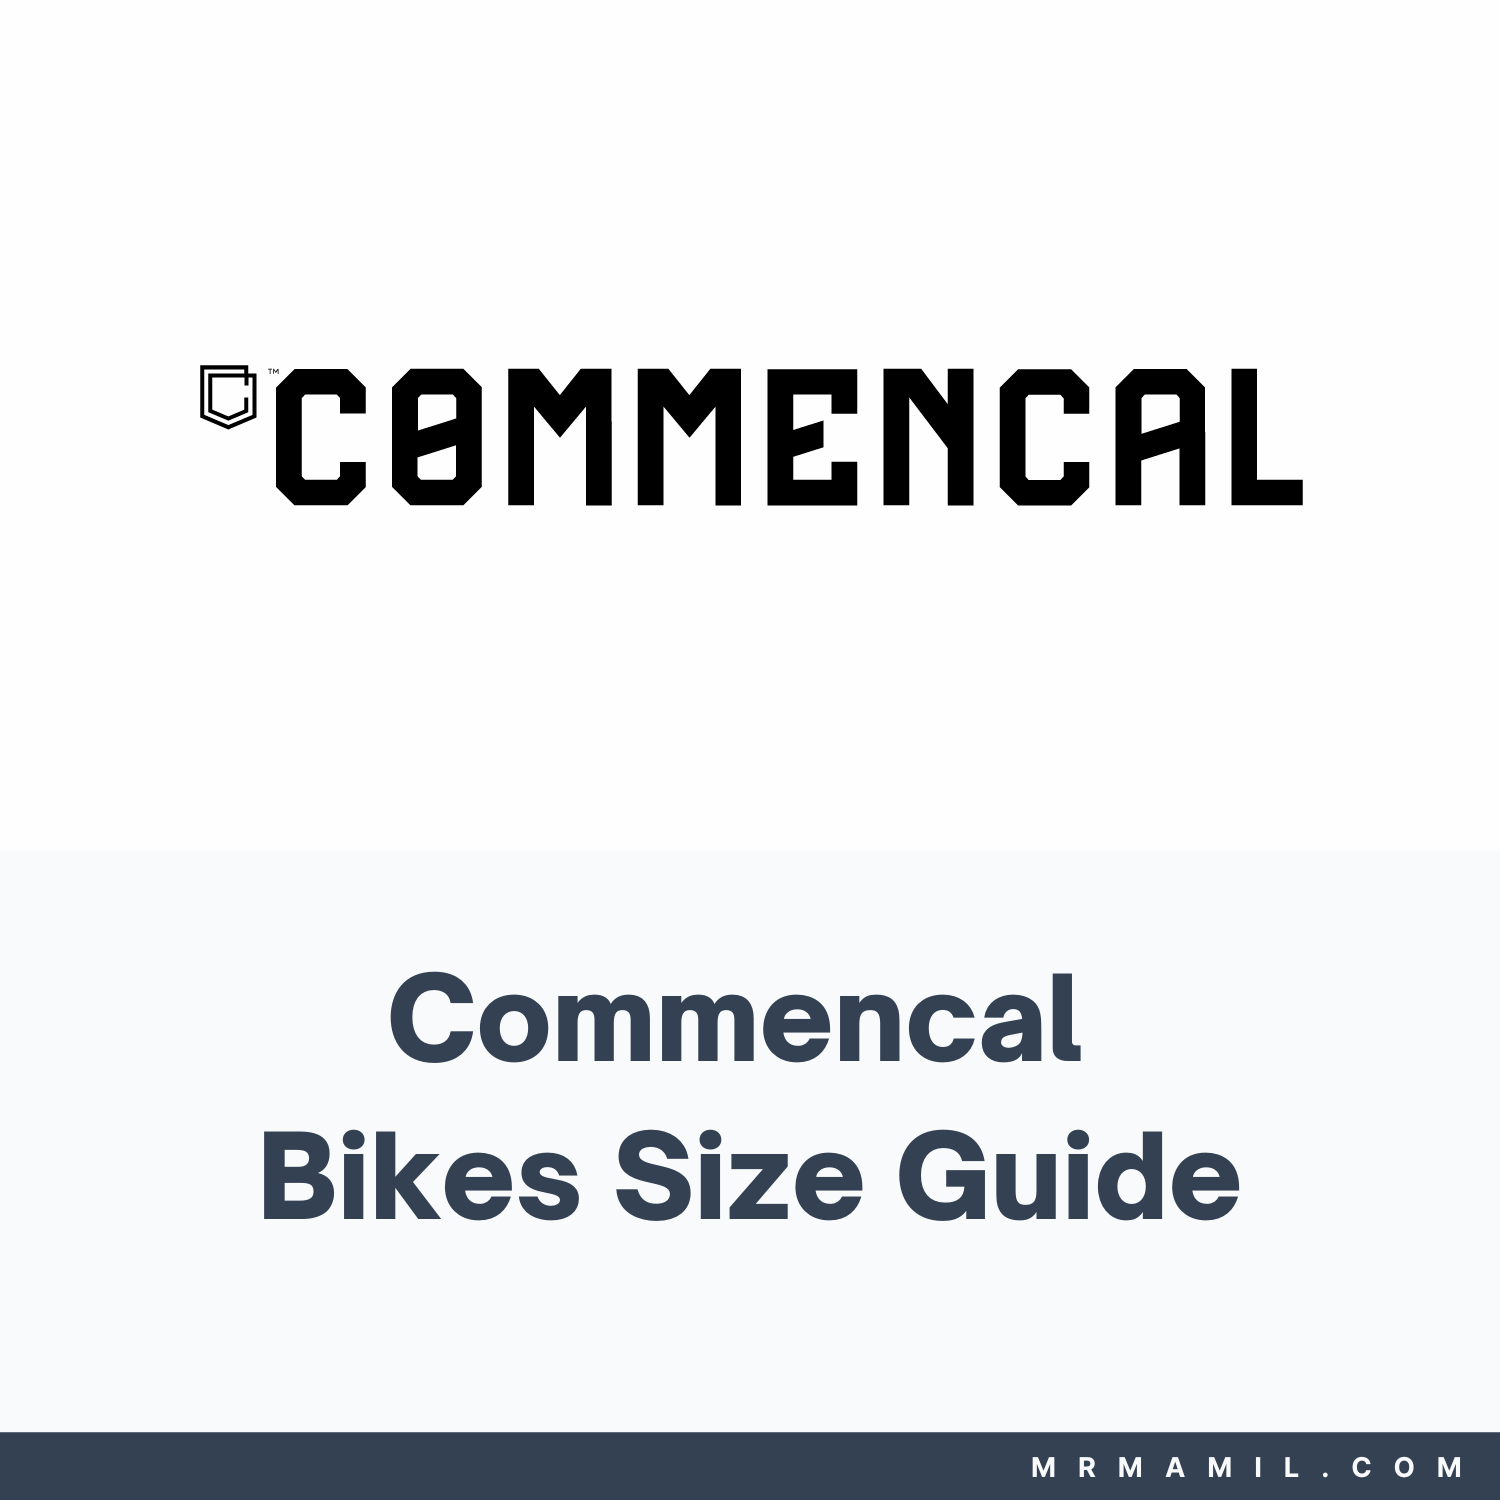 Commencal Bikes Size Guide